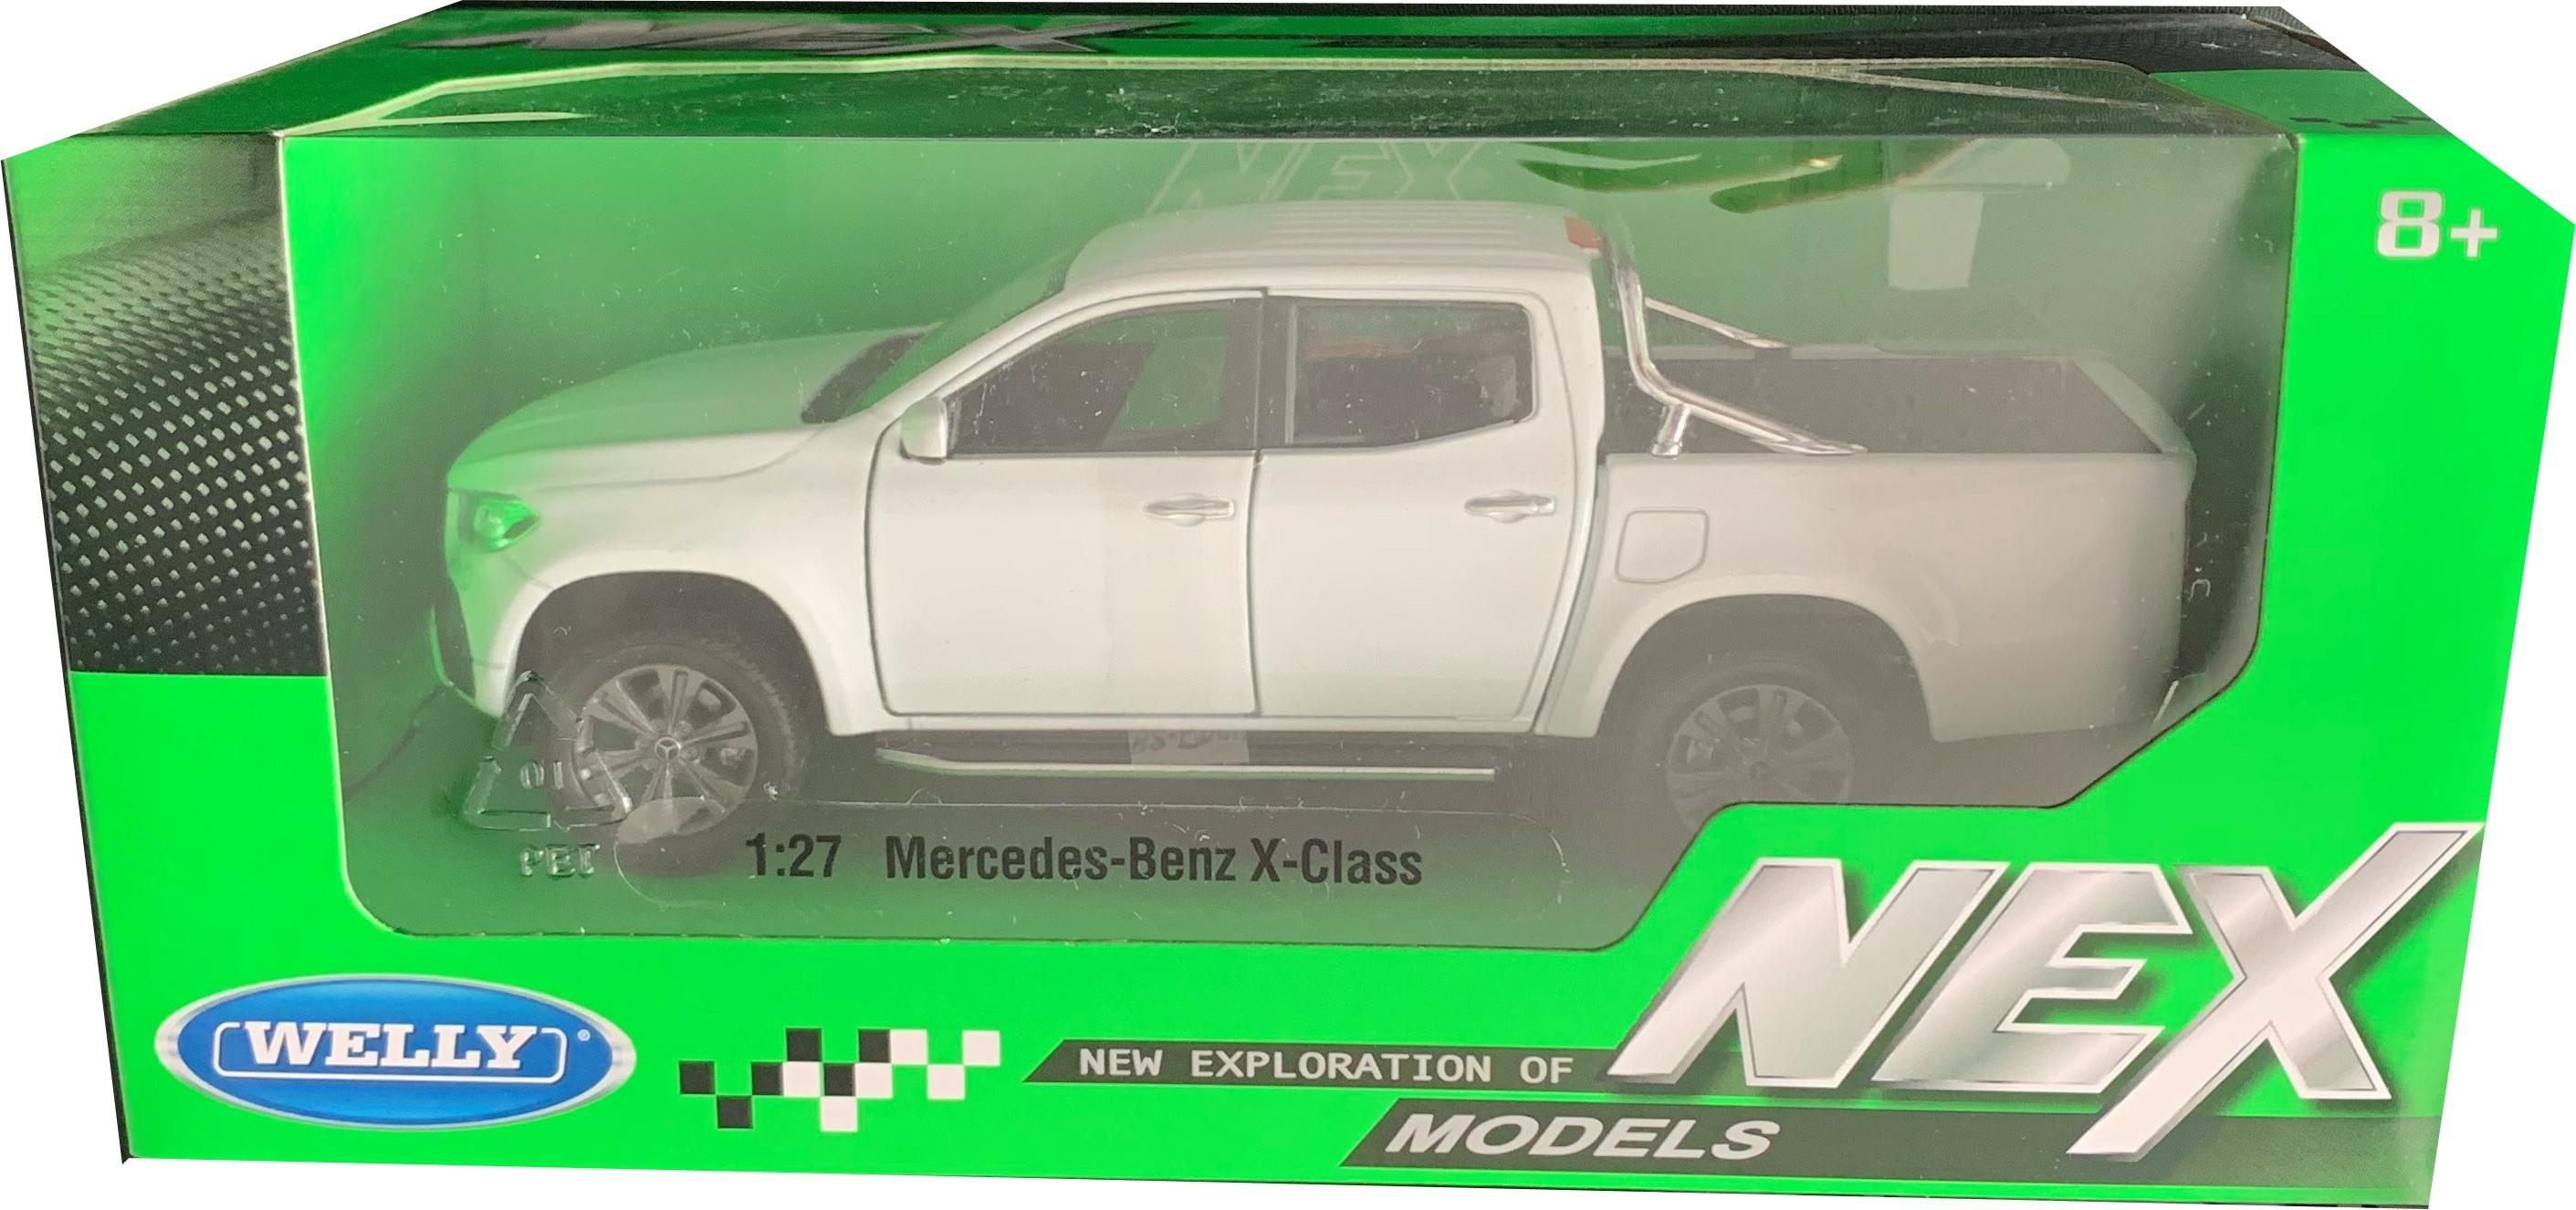 An excellent reproduction of the Mercedes Benz X Class with high level of detail throughout, all authentically recreated. The model is presented in a window display box, the car is approx. 18½ cm long and the presentation box is 24 cm long